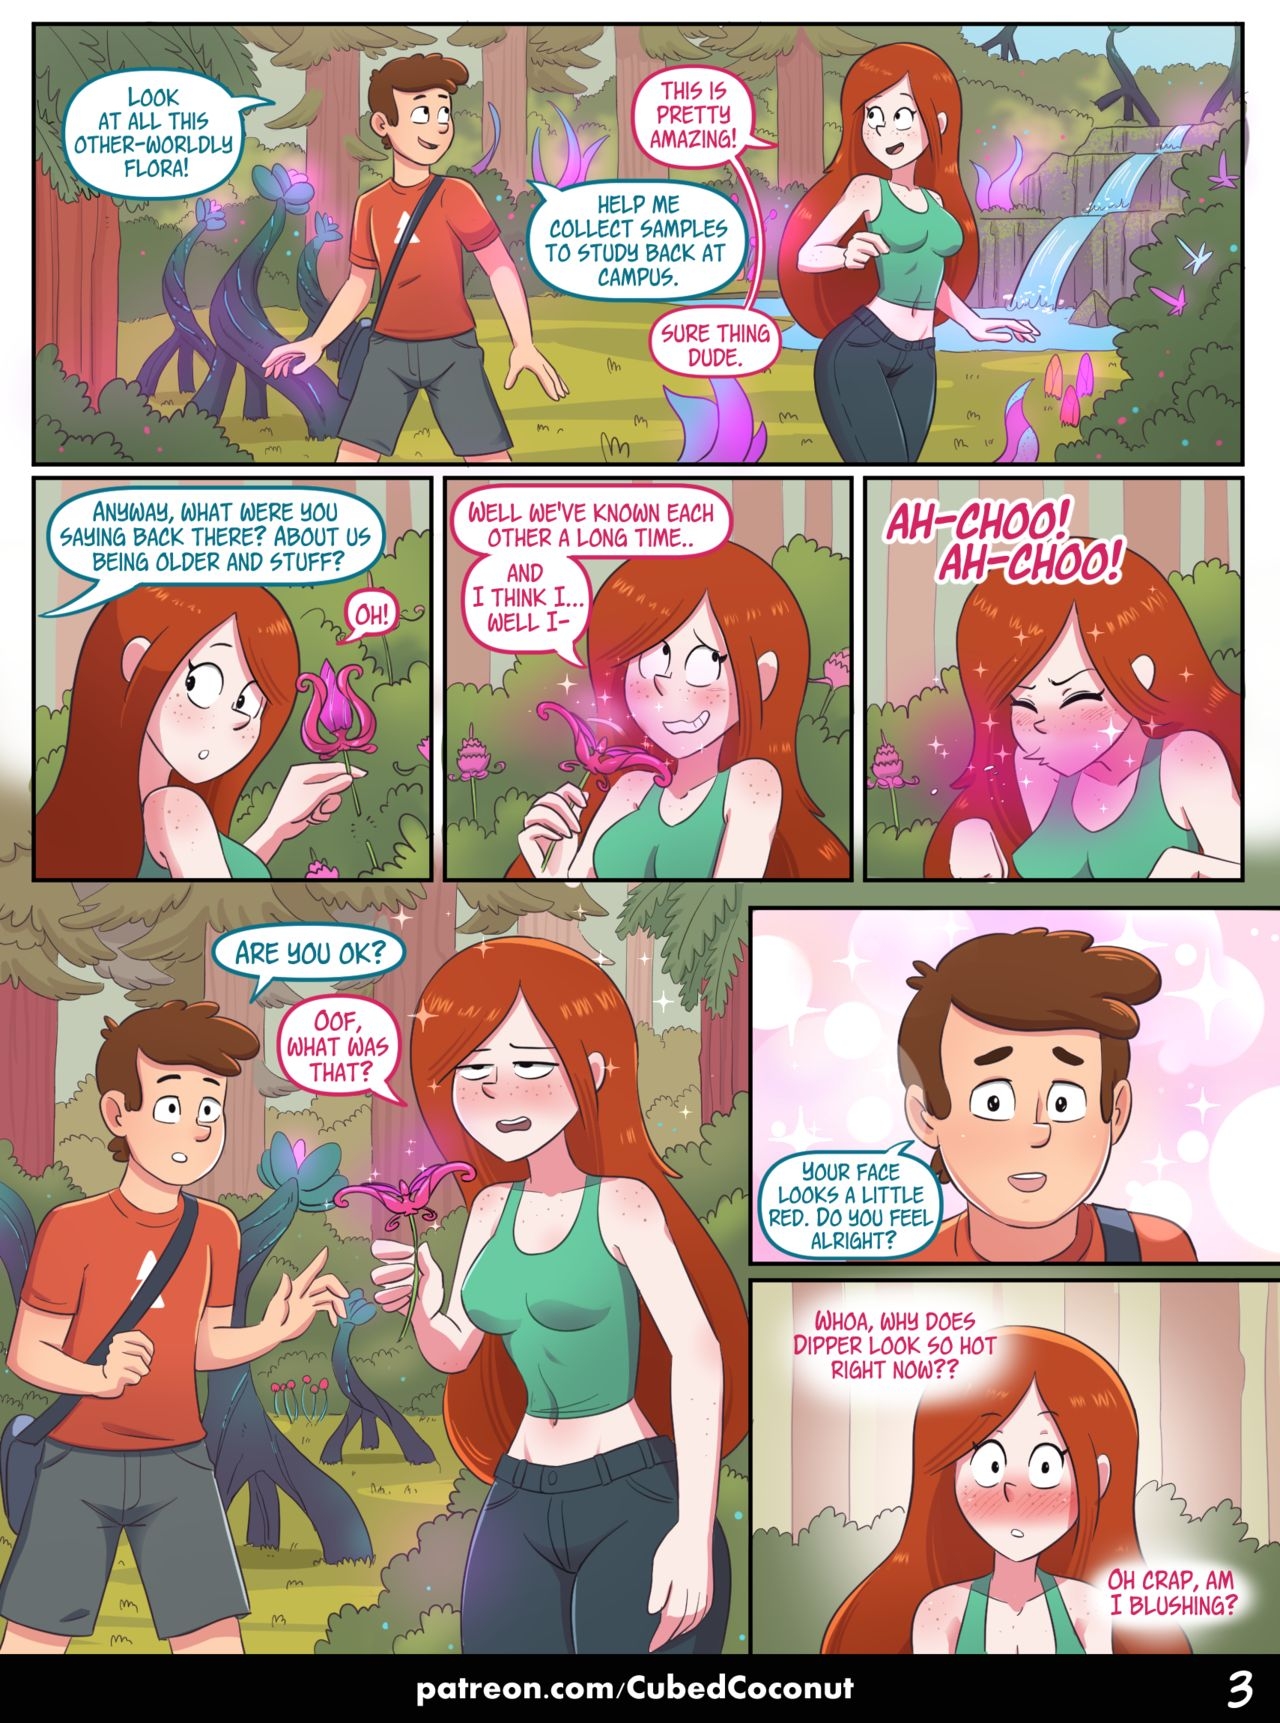 [Cubed Coconut] Wendy's Confession (Gravity Falls) 3